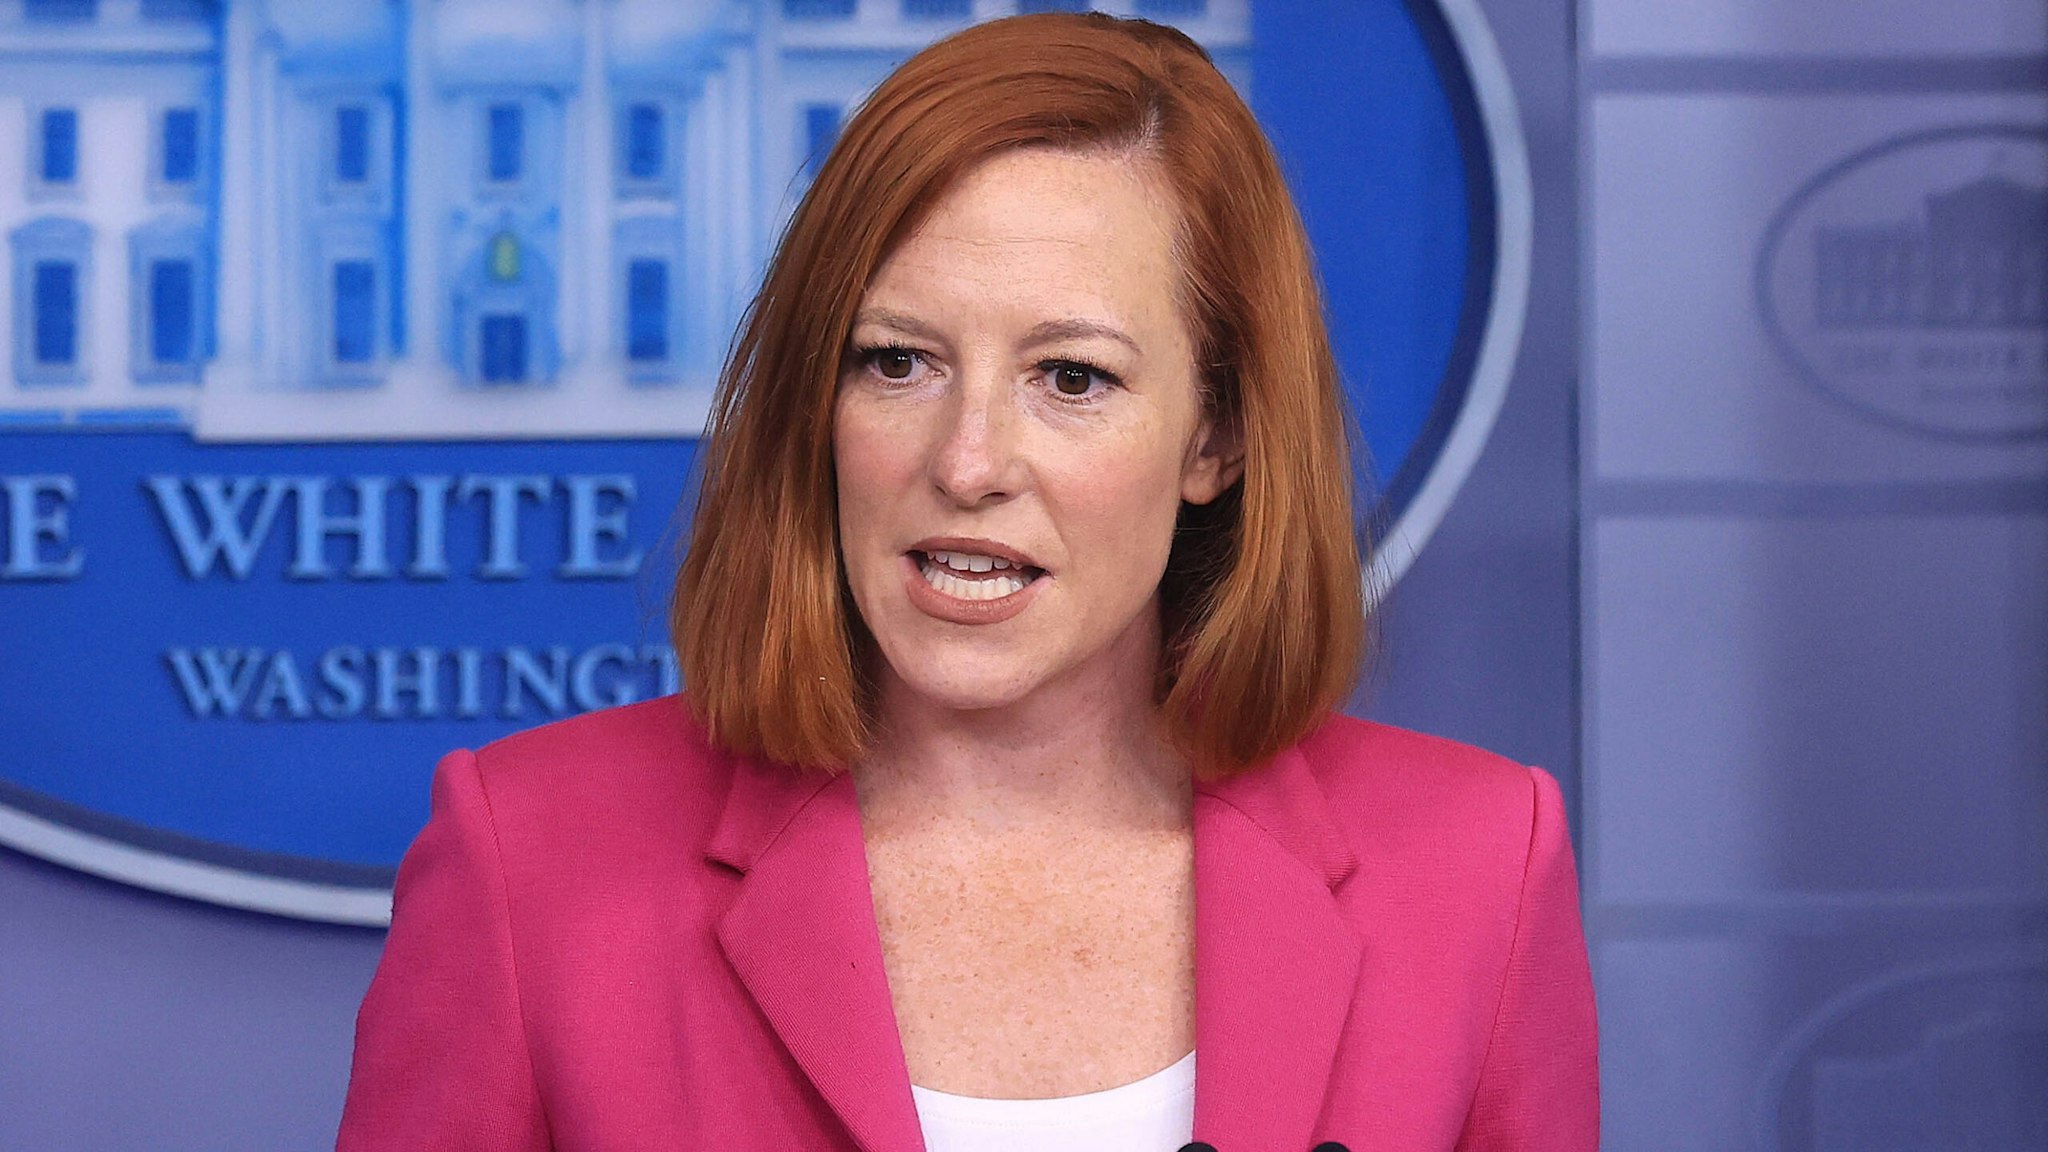 WASHINGTON, DC - OCTOBER 22: White House Press Secretary Jen Psaki talks to reporters in the Brady Press Briefing Room at the White House on October 22, 2021 in Washington, DC. Psaki fielded questions about U.S. policy toward Taiwan, the ongoing negotiations with Congress over the Build Back Better legislation, the Republican opposition to election reform, President Biden's upcoming trip to Europe and other topics.